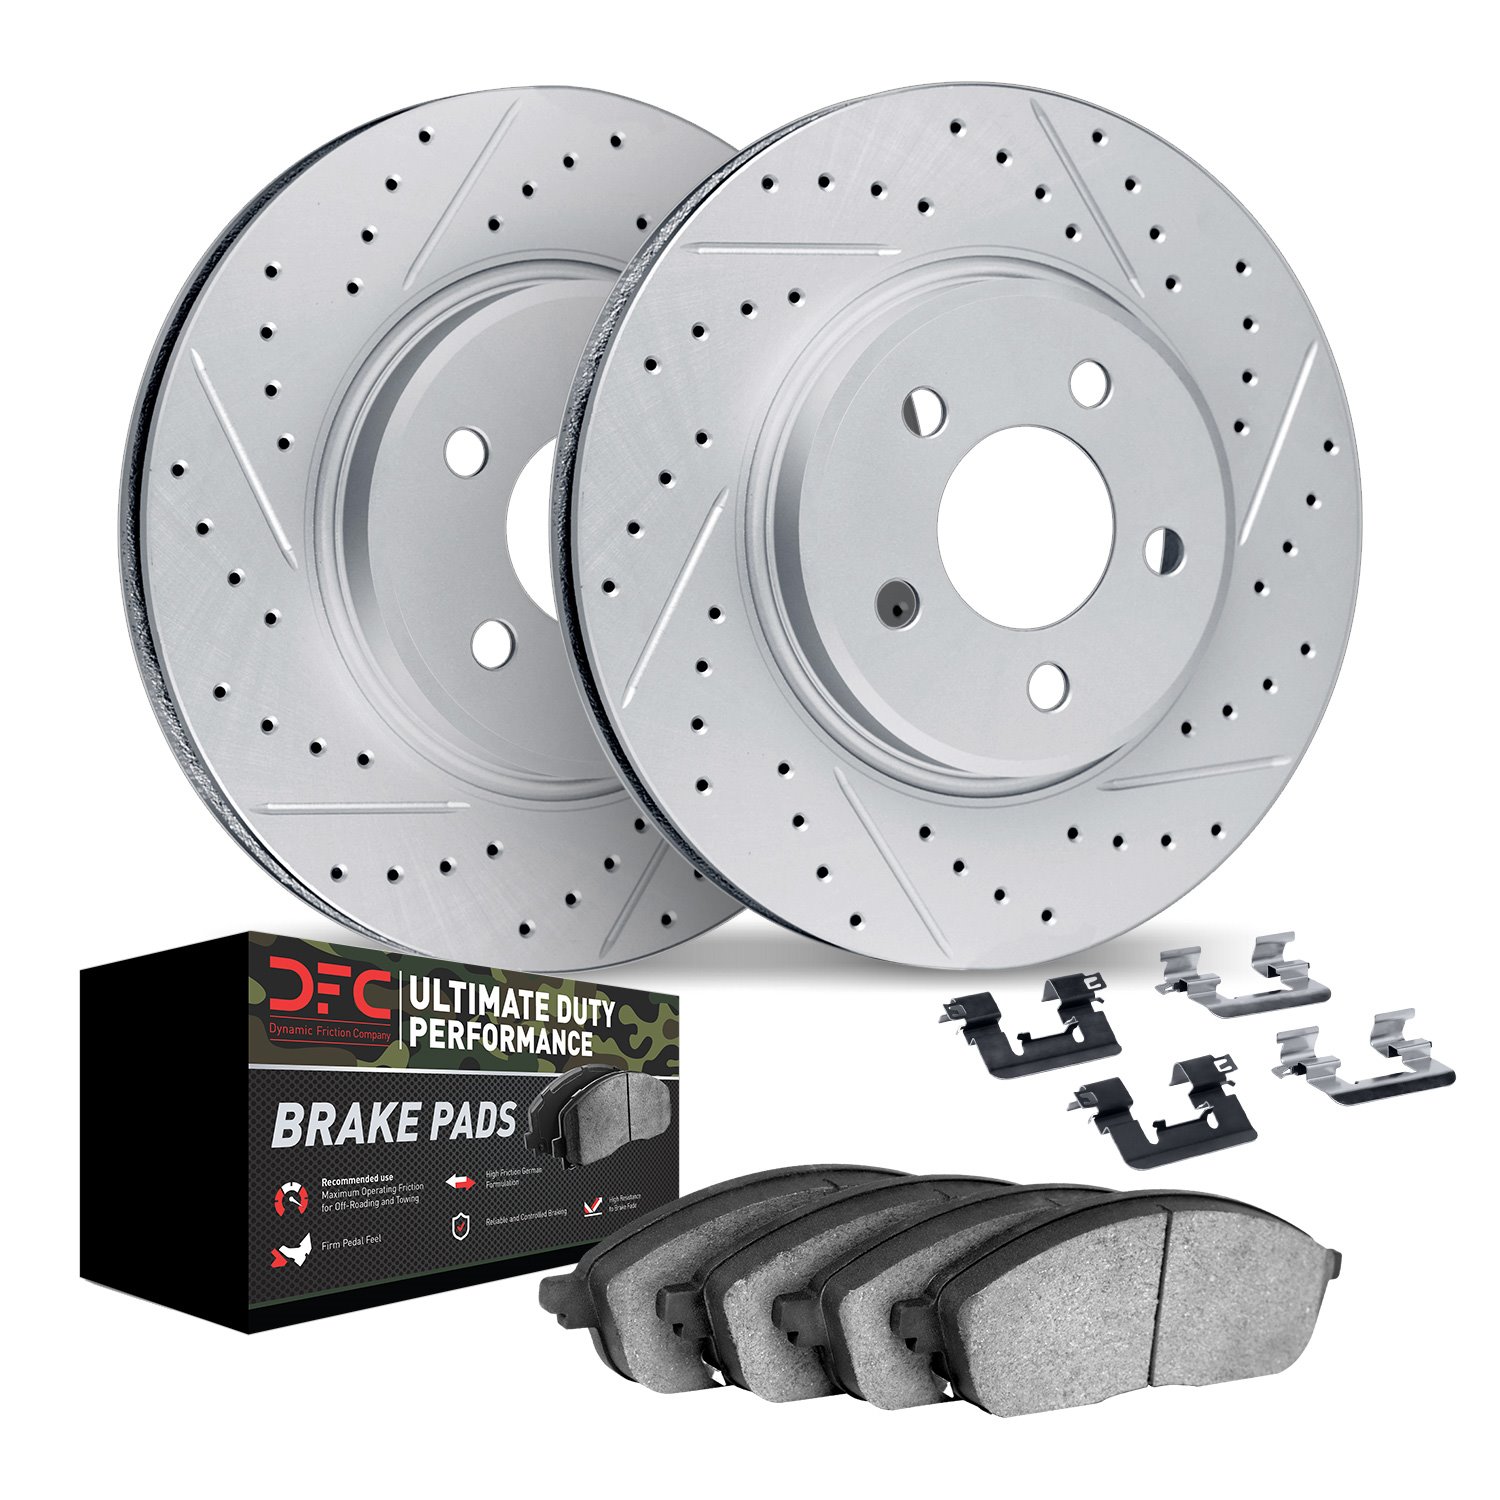 2412-54033 Geoperformance Drilled/Slotted Brake Rotors with Ultimate-Duty Brake Pads Kit & Hardware, 2001-2005 Ford/Lincoln/Merc